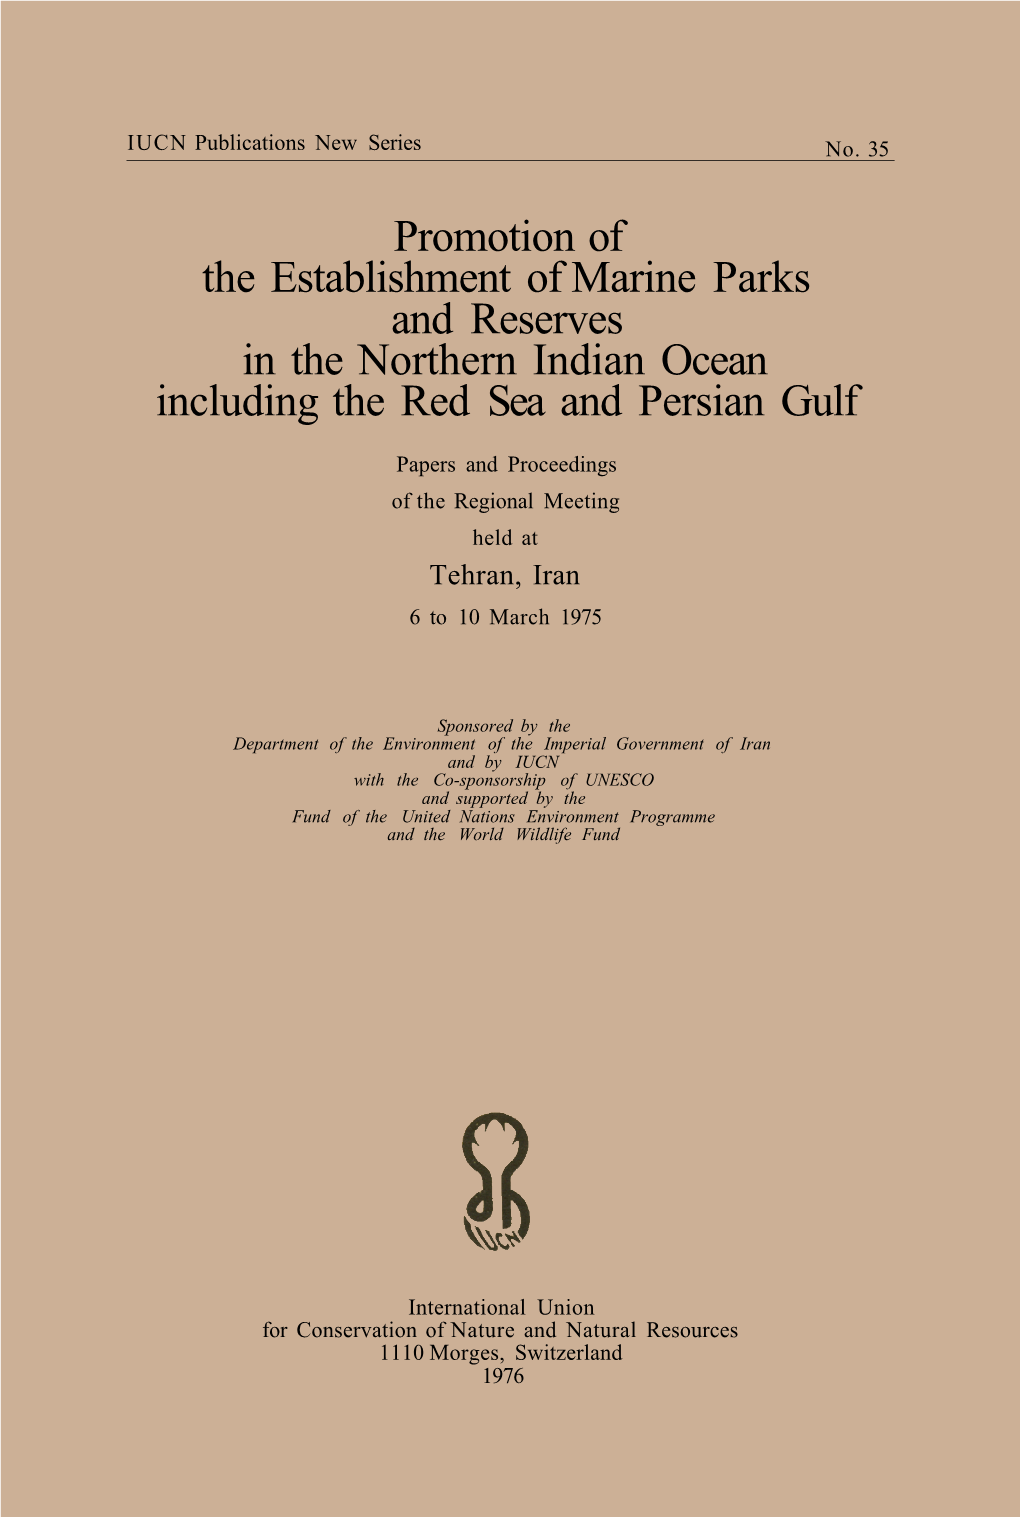 Promotion of the Establishment of Marine Parks and Reserves in the Northern Indian Ocean Including the Red Sea and Persian Gulf